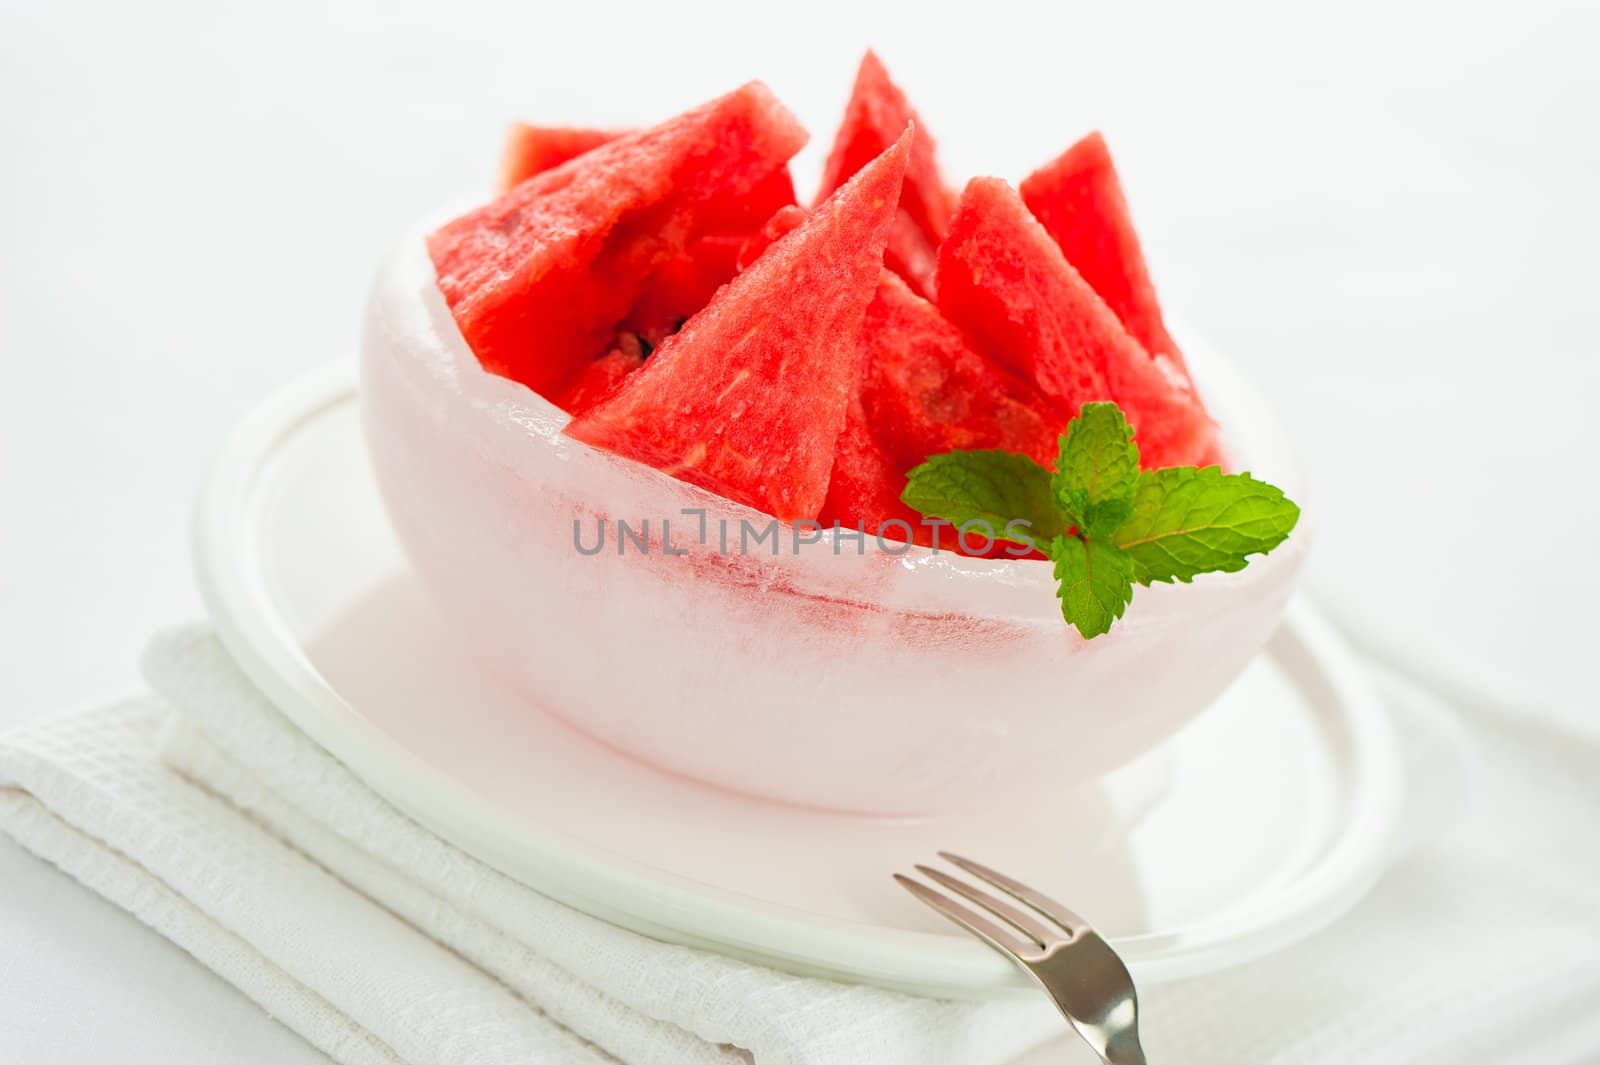 Studio shot of watermelon in an ice bowl